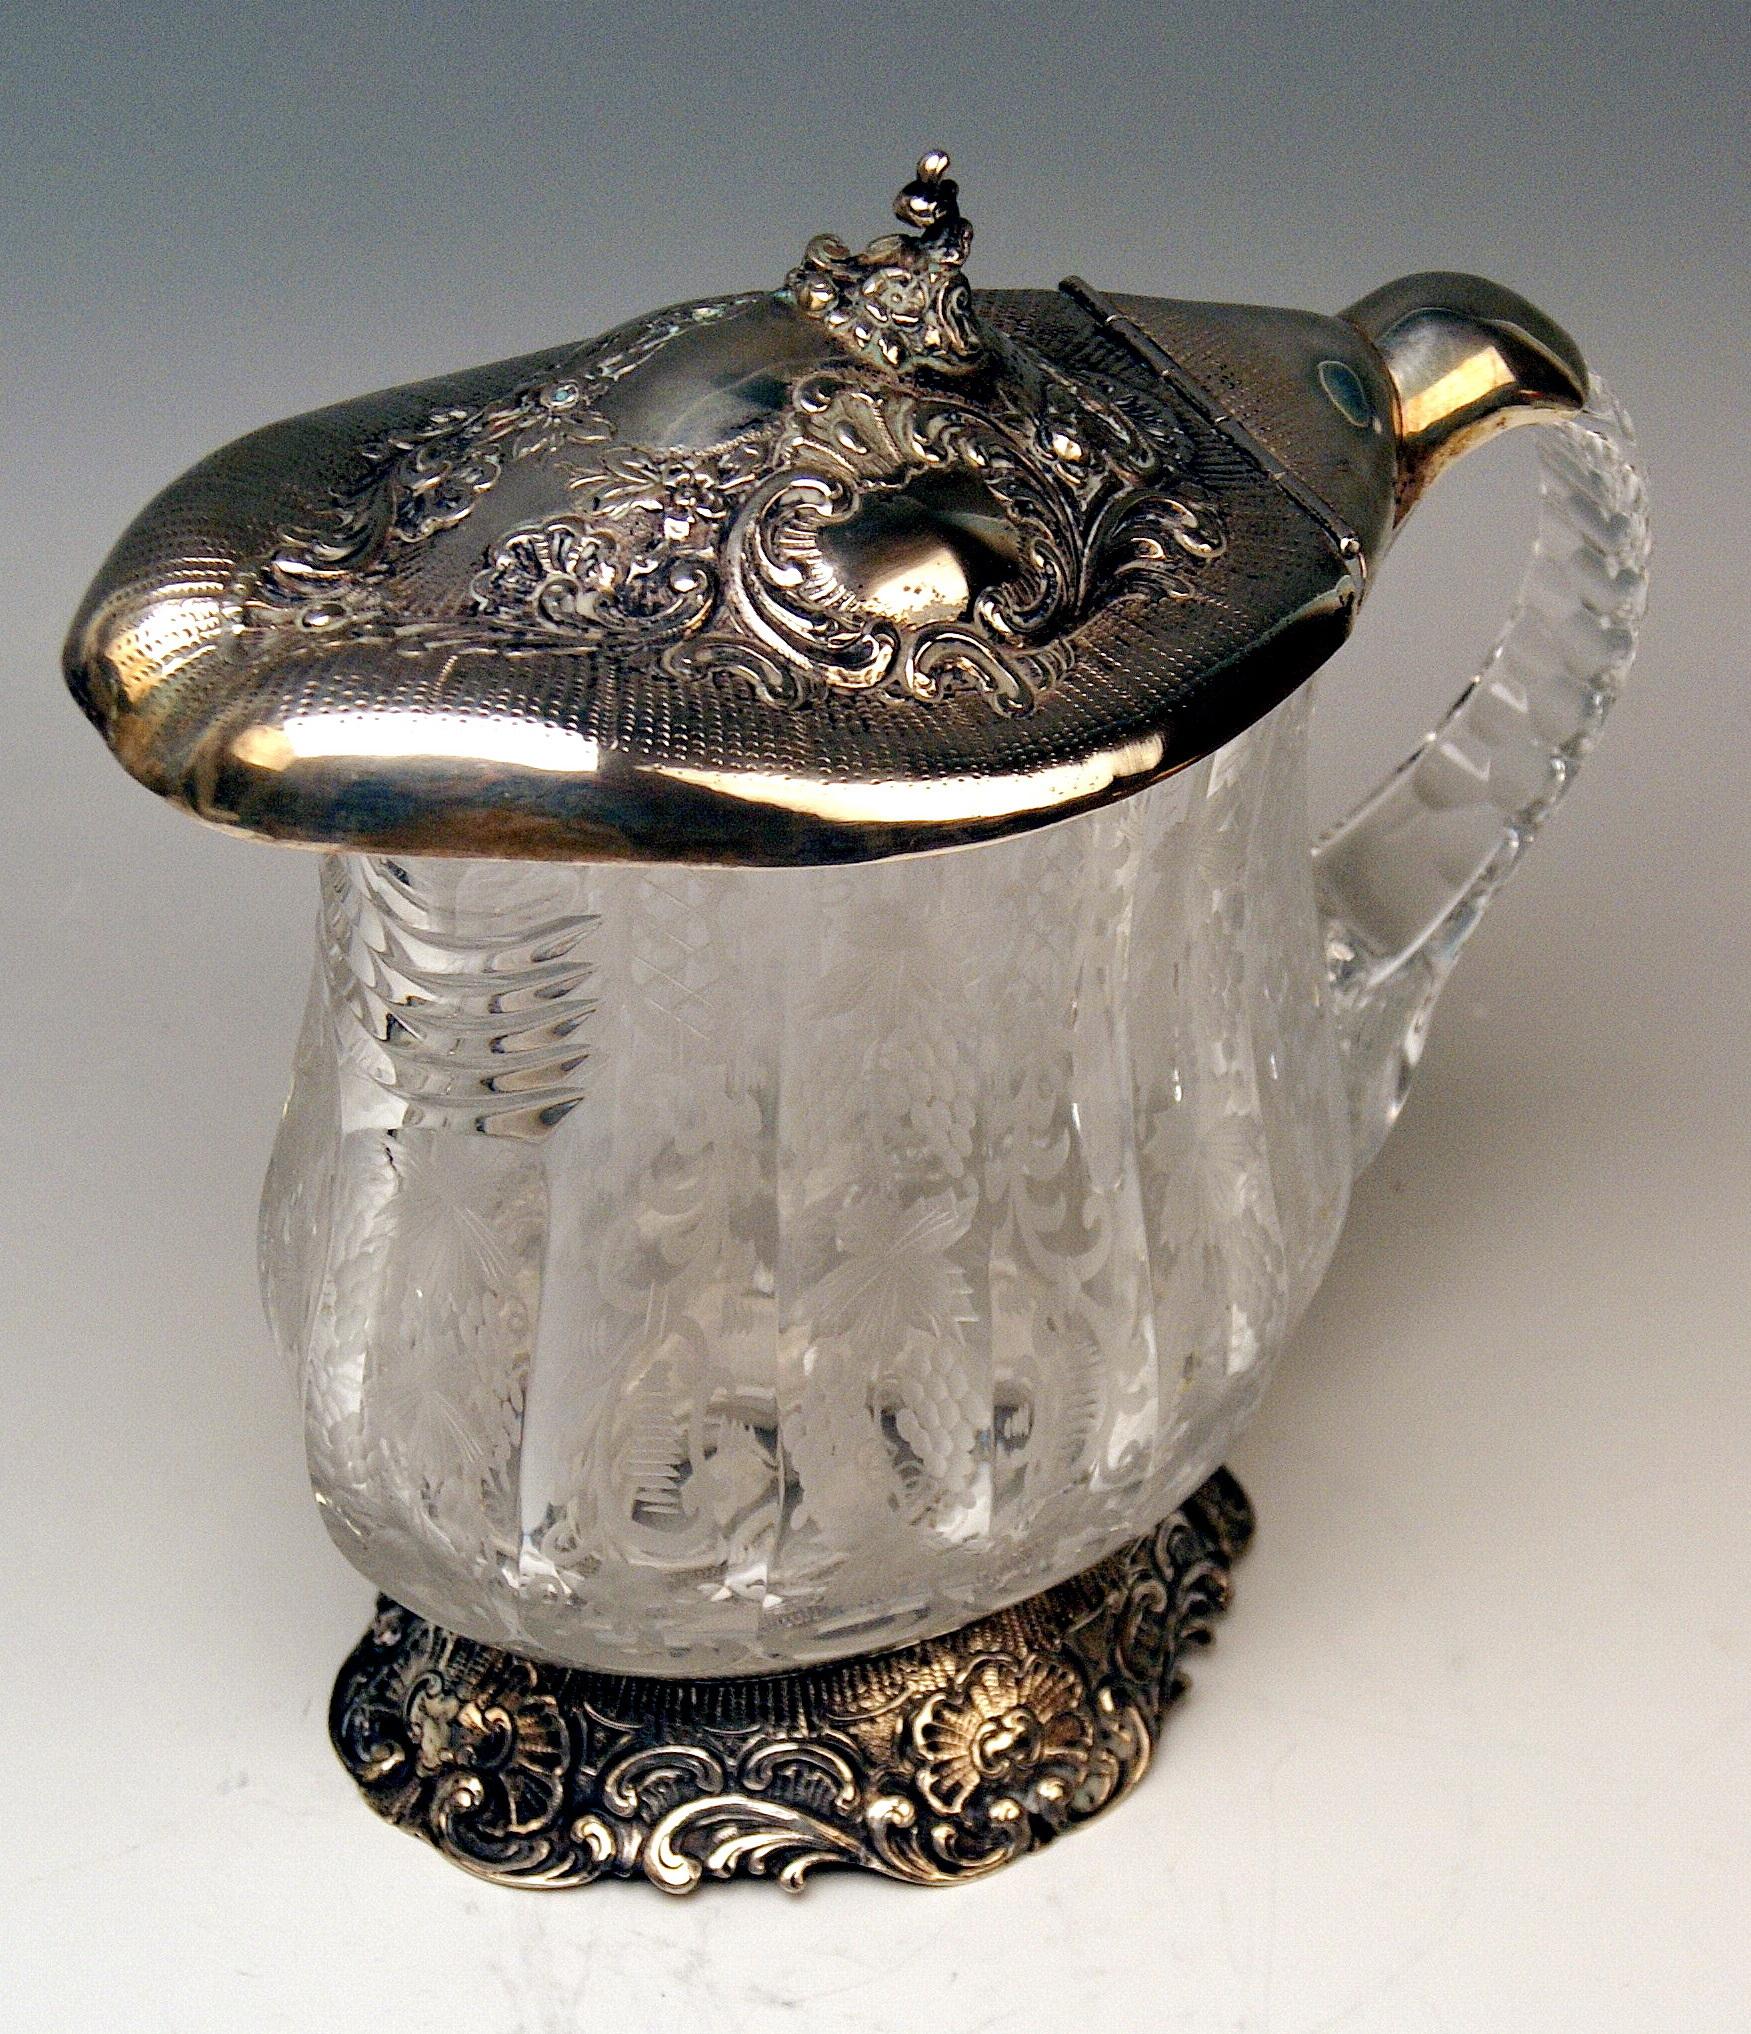 Late Victorian Silver Tall Wine Jug Pitcher Silver Mountings Cut Glass Germany, Made circa 1880